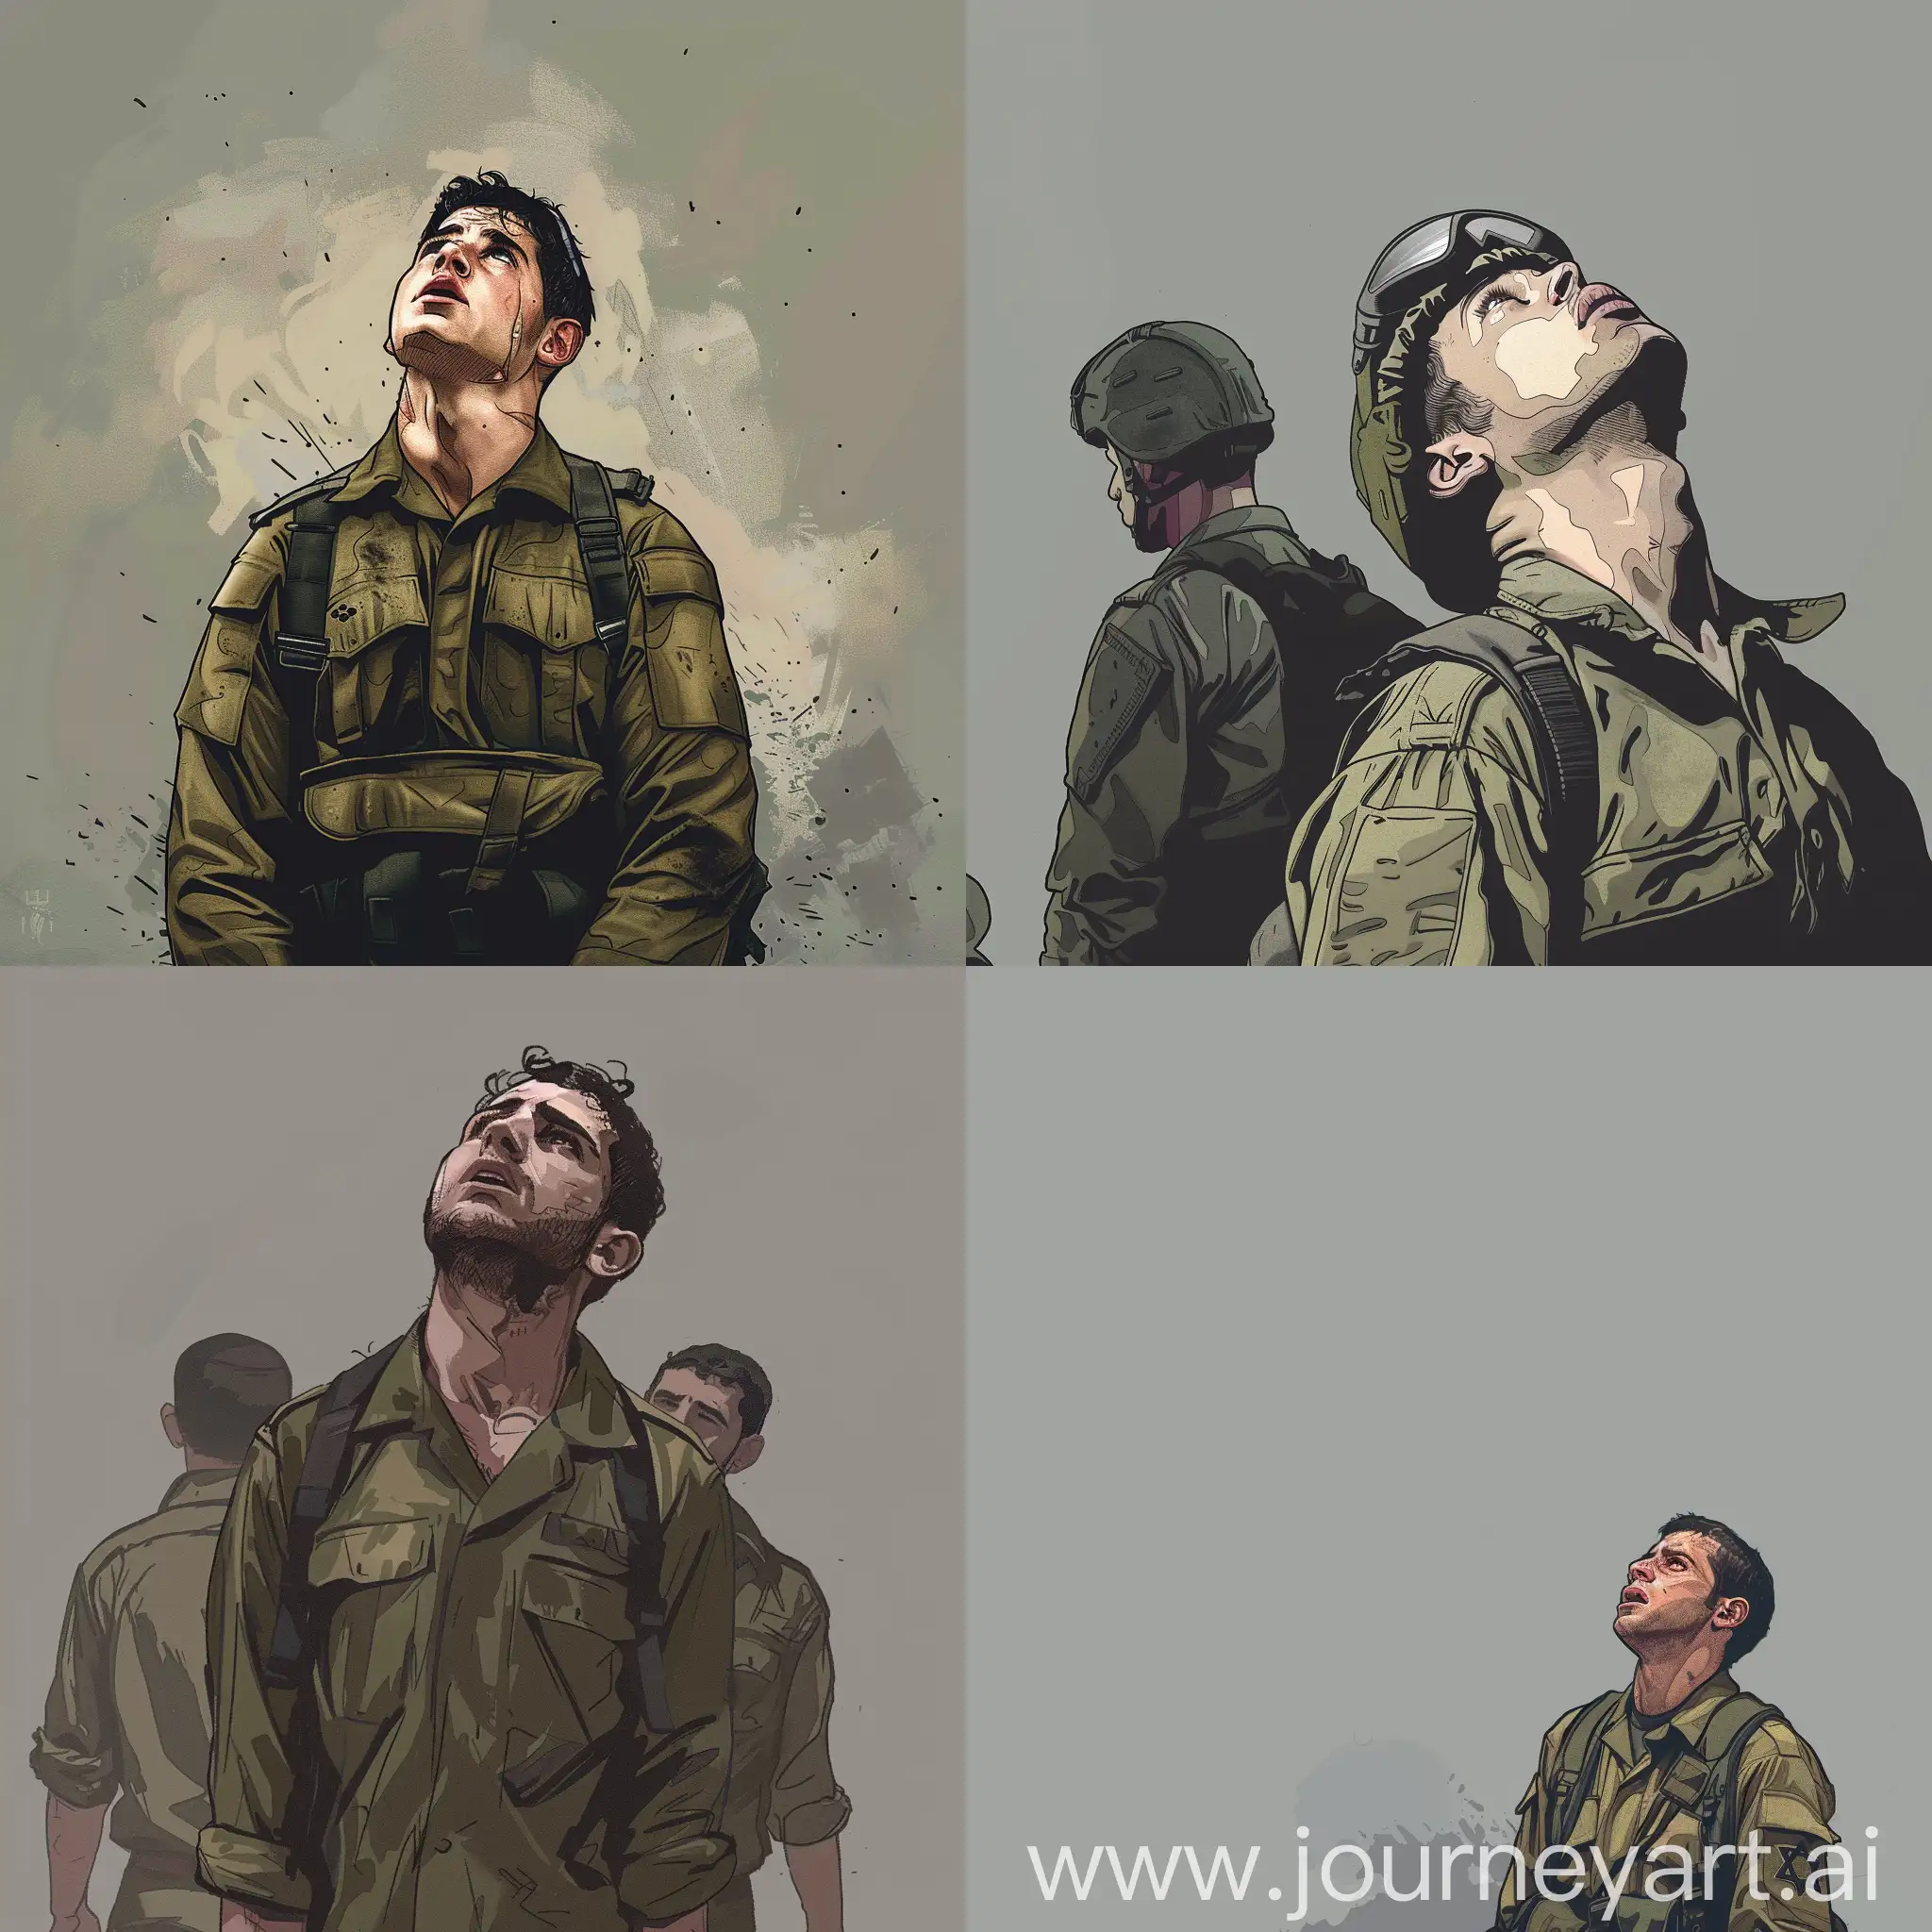 An Israeli soldier in the middle, from the corner of the eye. He looks up in fear. With his hands behind him. In the background is a gray background